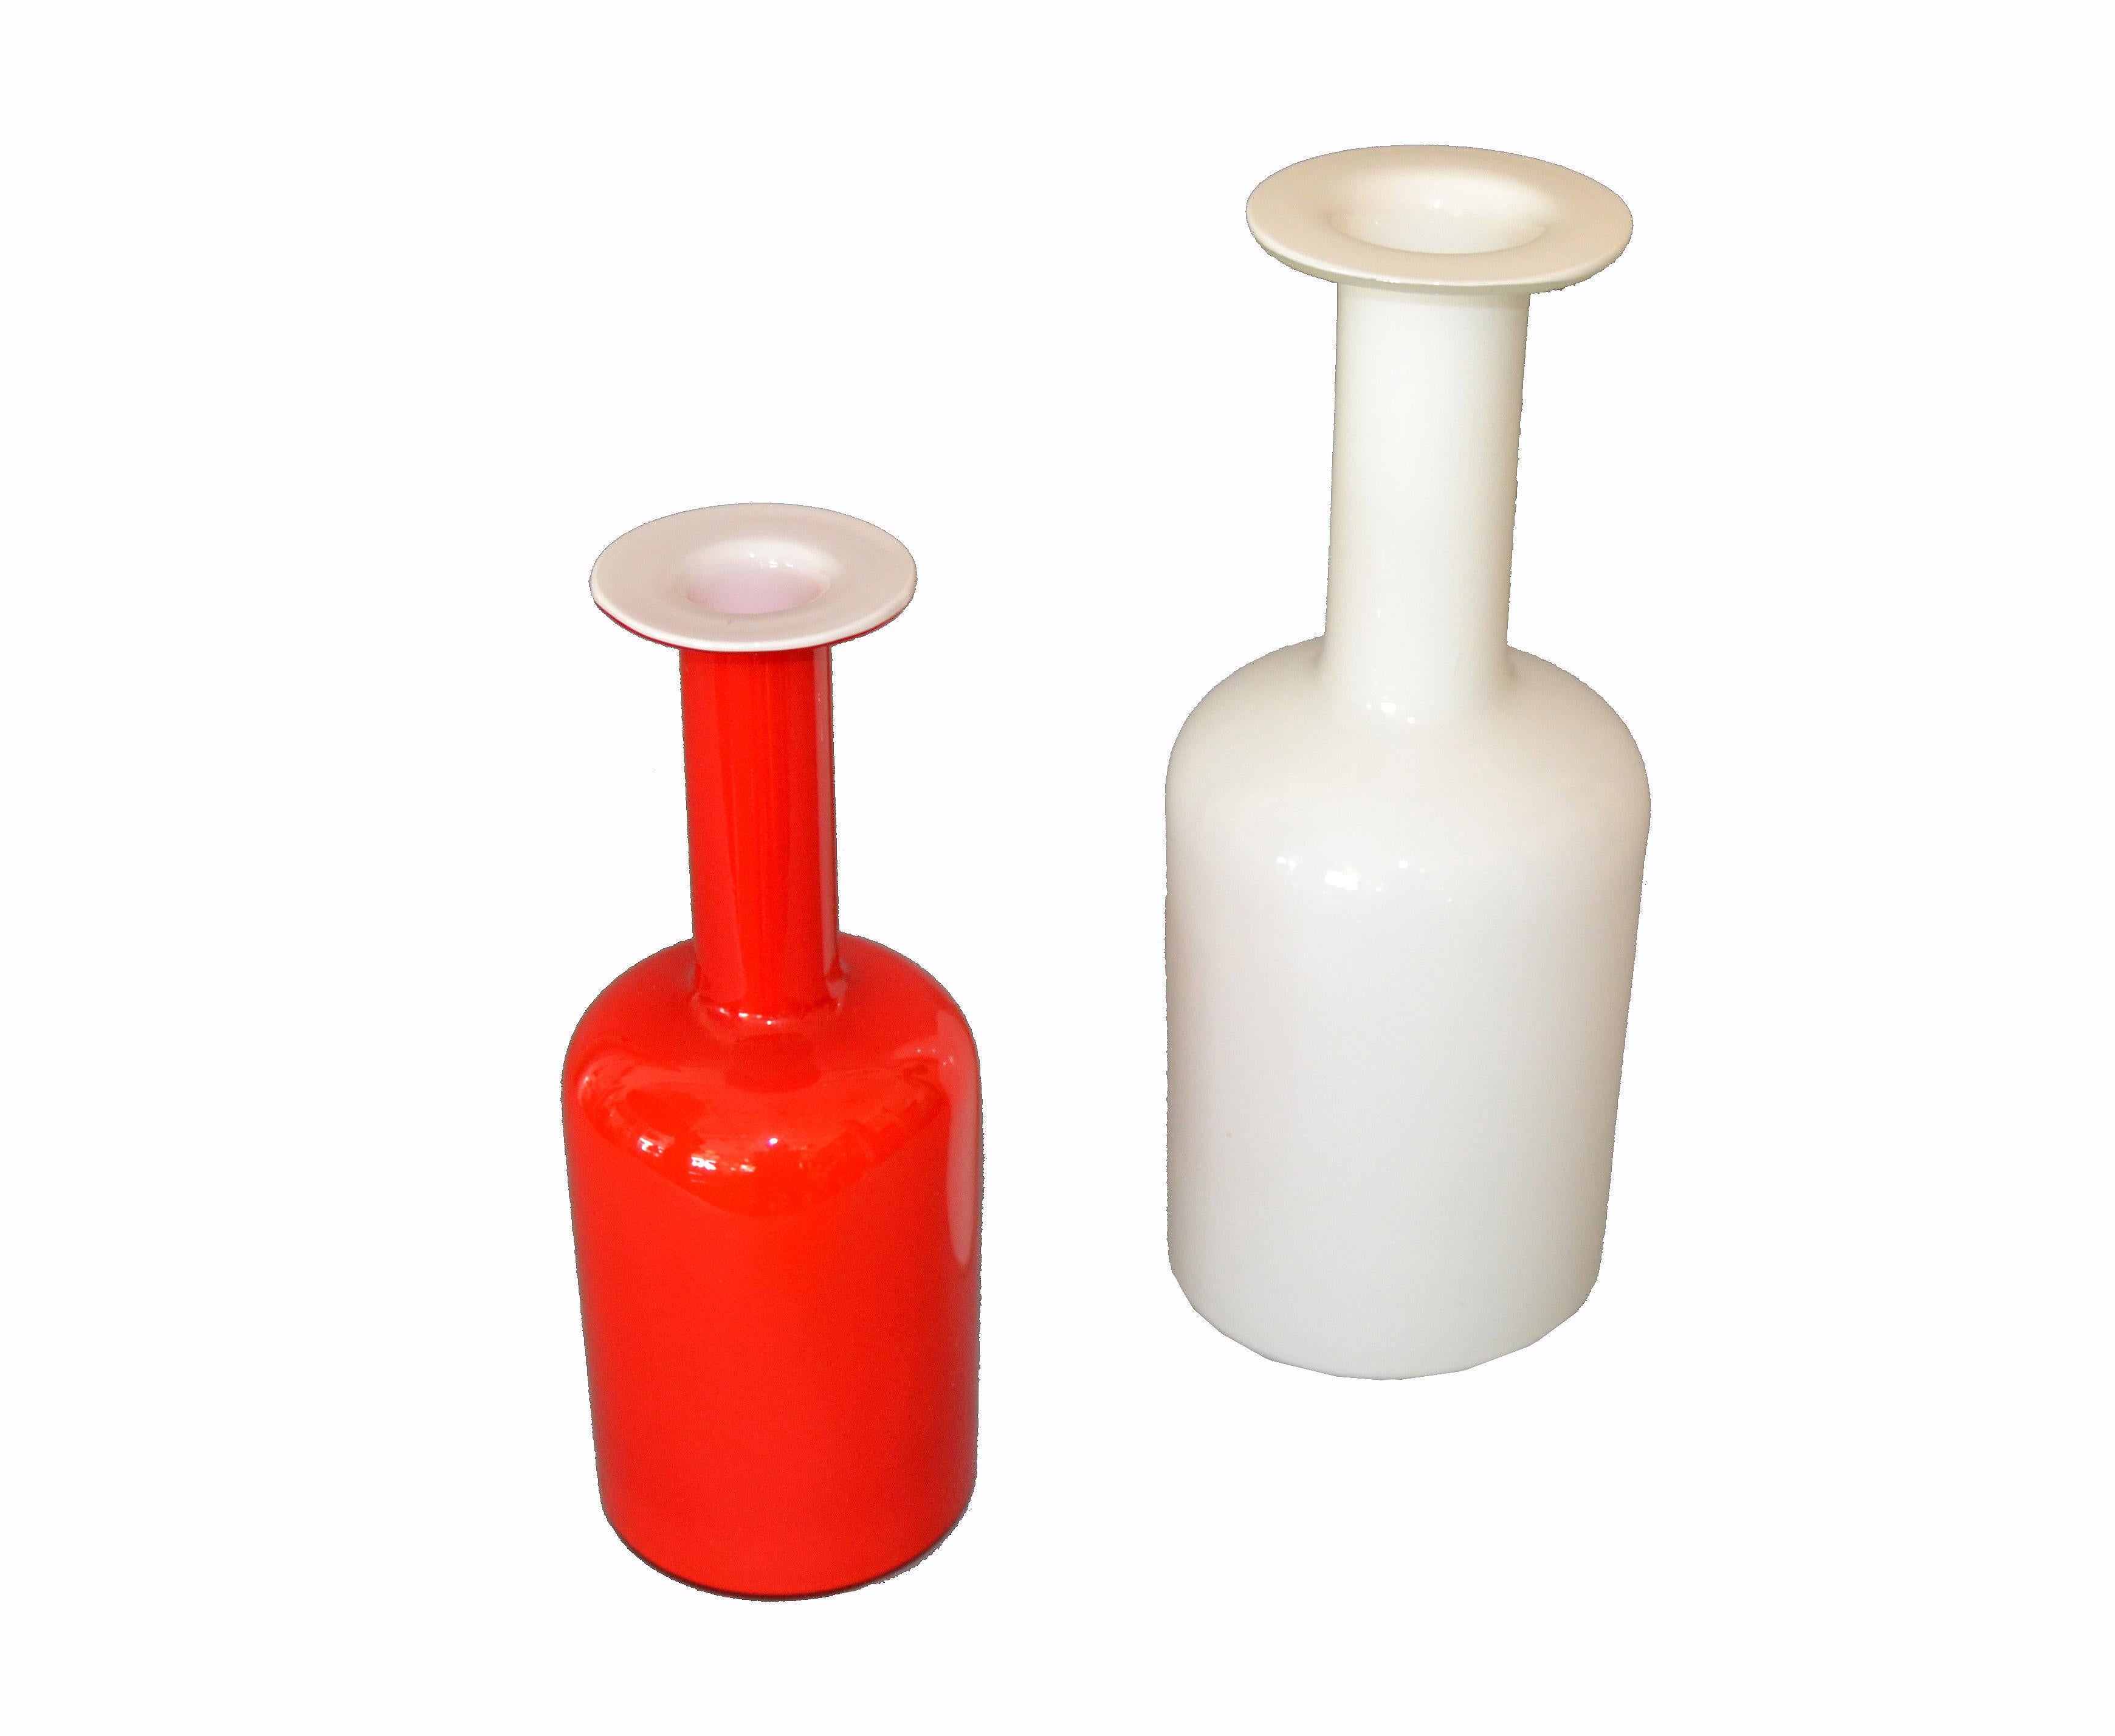 Two hand blown Gulv Vases in red and milk glass cased in white, designed by Otto Bauer and made by Holmegaard in Denmark.
Both vases have the original makers mark.
Iconic art glass from the 1960s design.
Measurement red vase:
Height 10 inches,